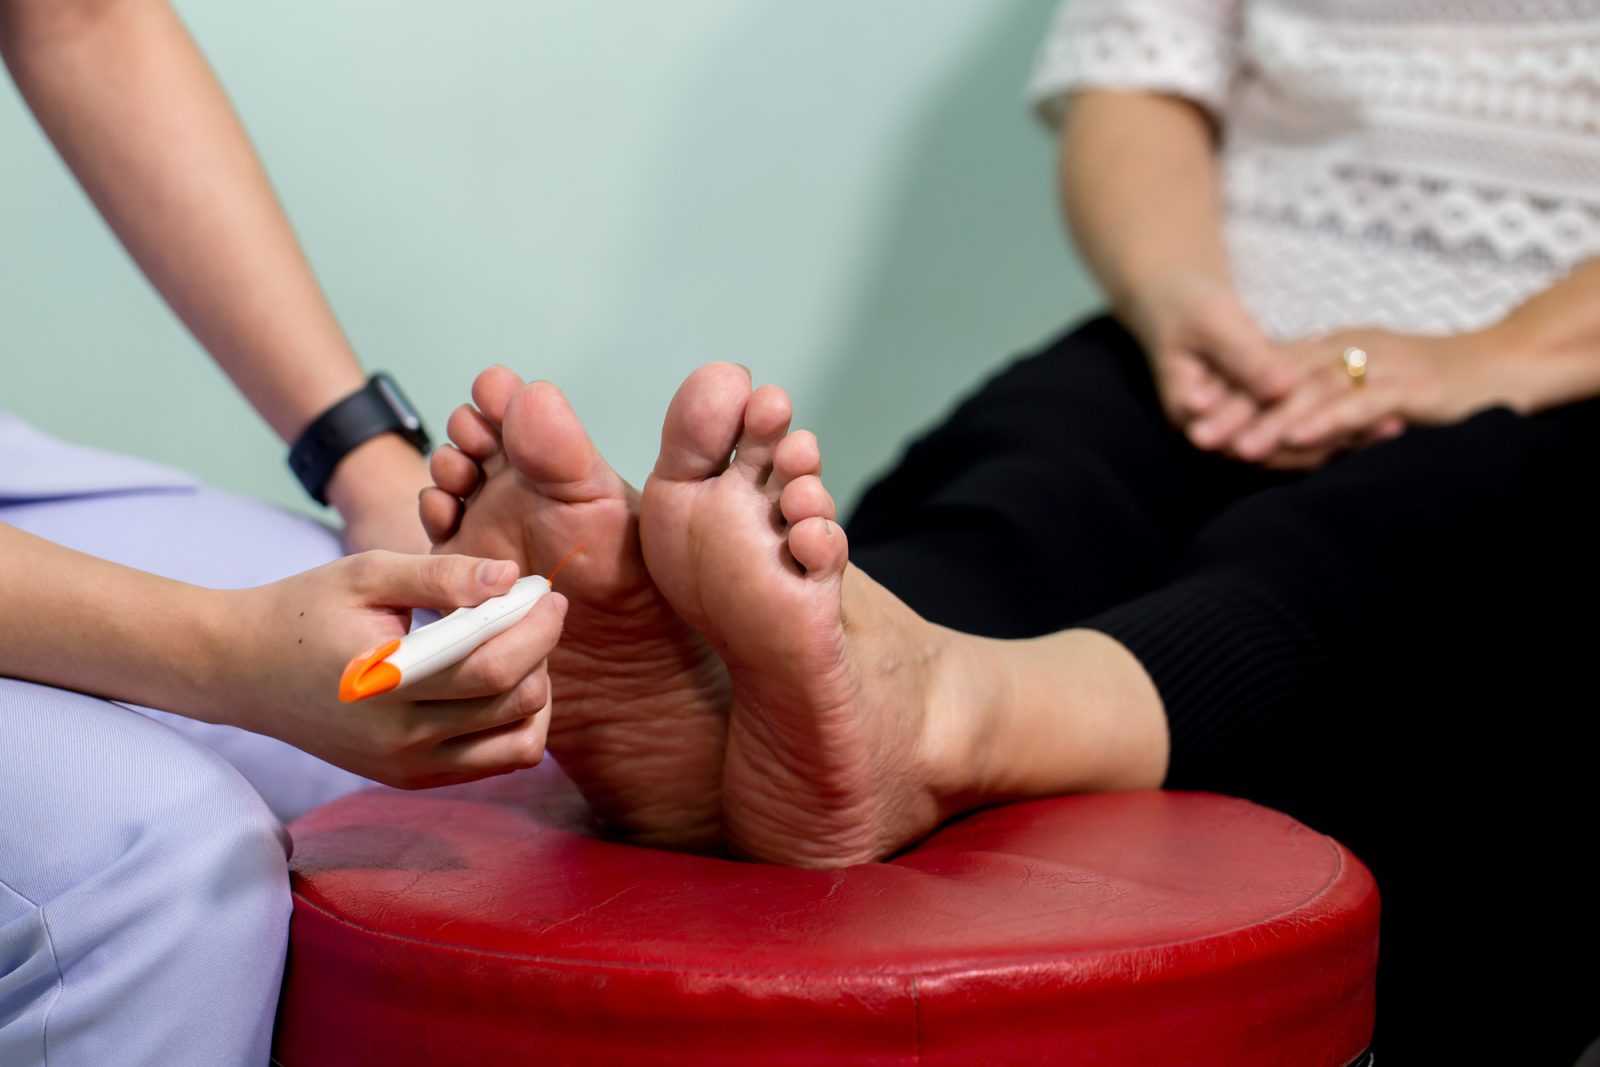 Advanced Podiatry Specialists Specialists offers tips for taking care of diabetic feet